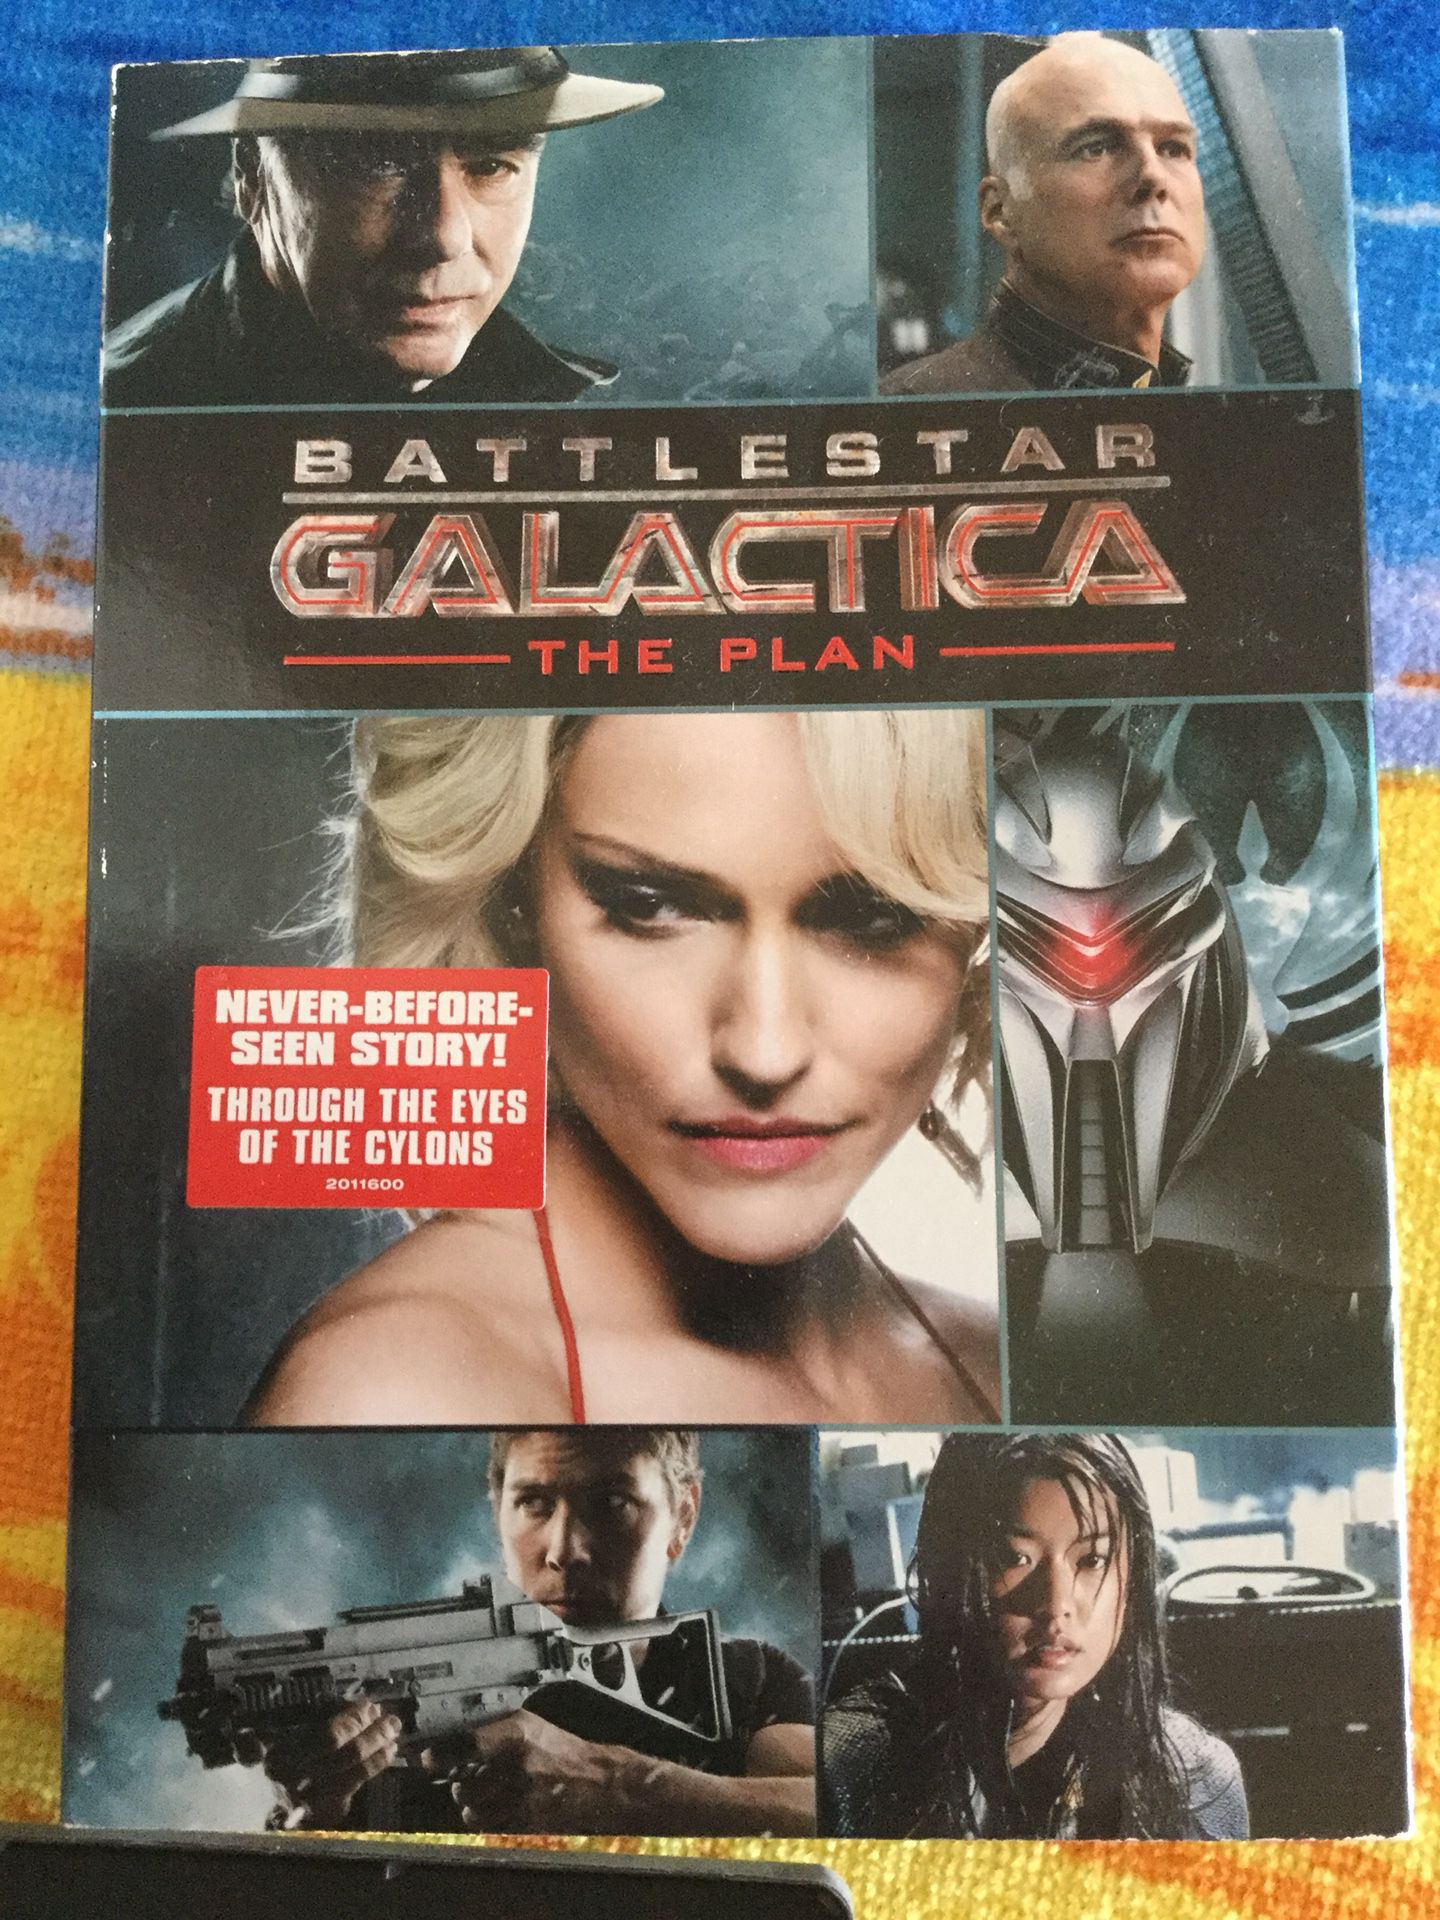 * THE PLAN * SCI -FI FILM DVD Battlestar Galactica very cool exiting / Visit for more 😁👍🍿🎥 📀